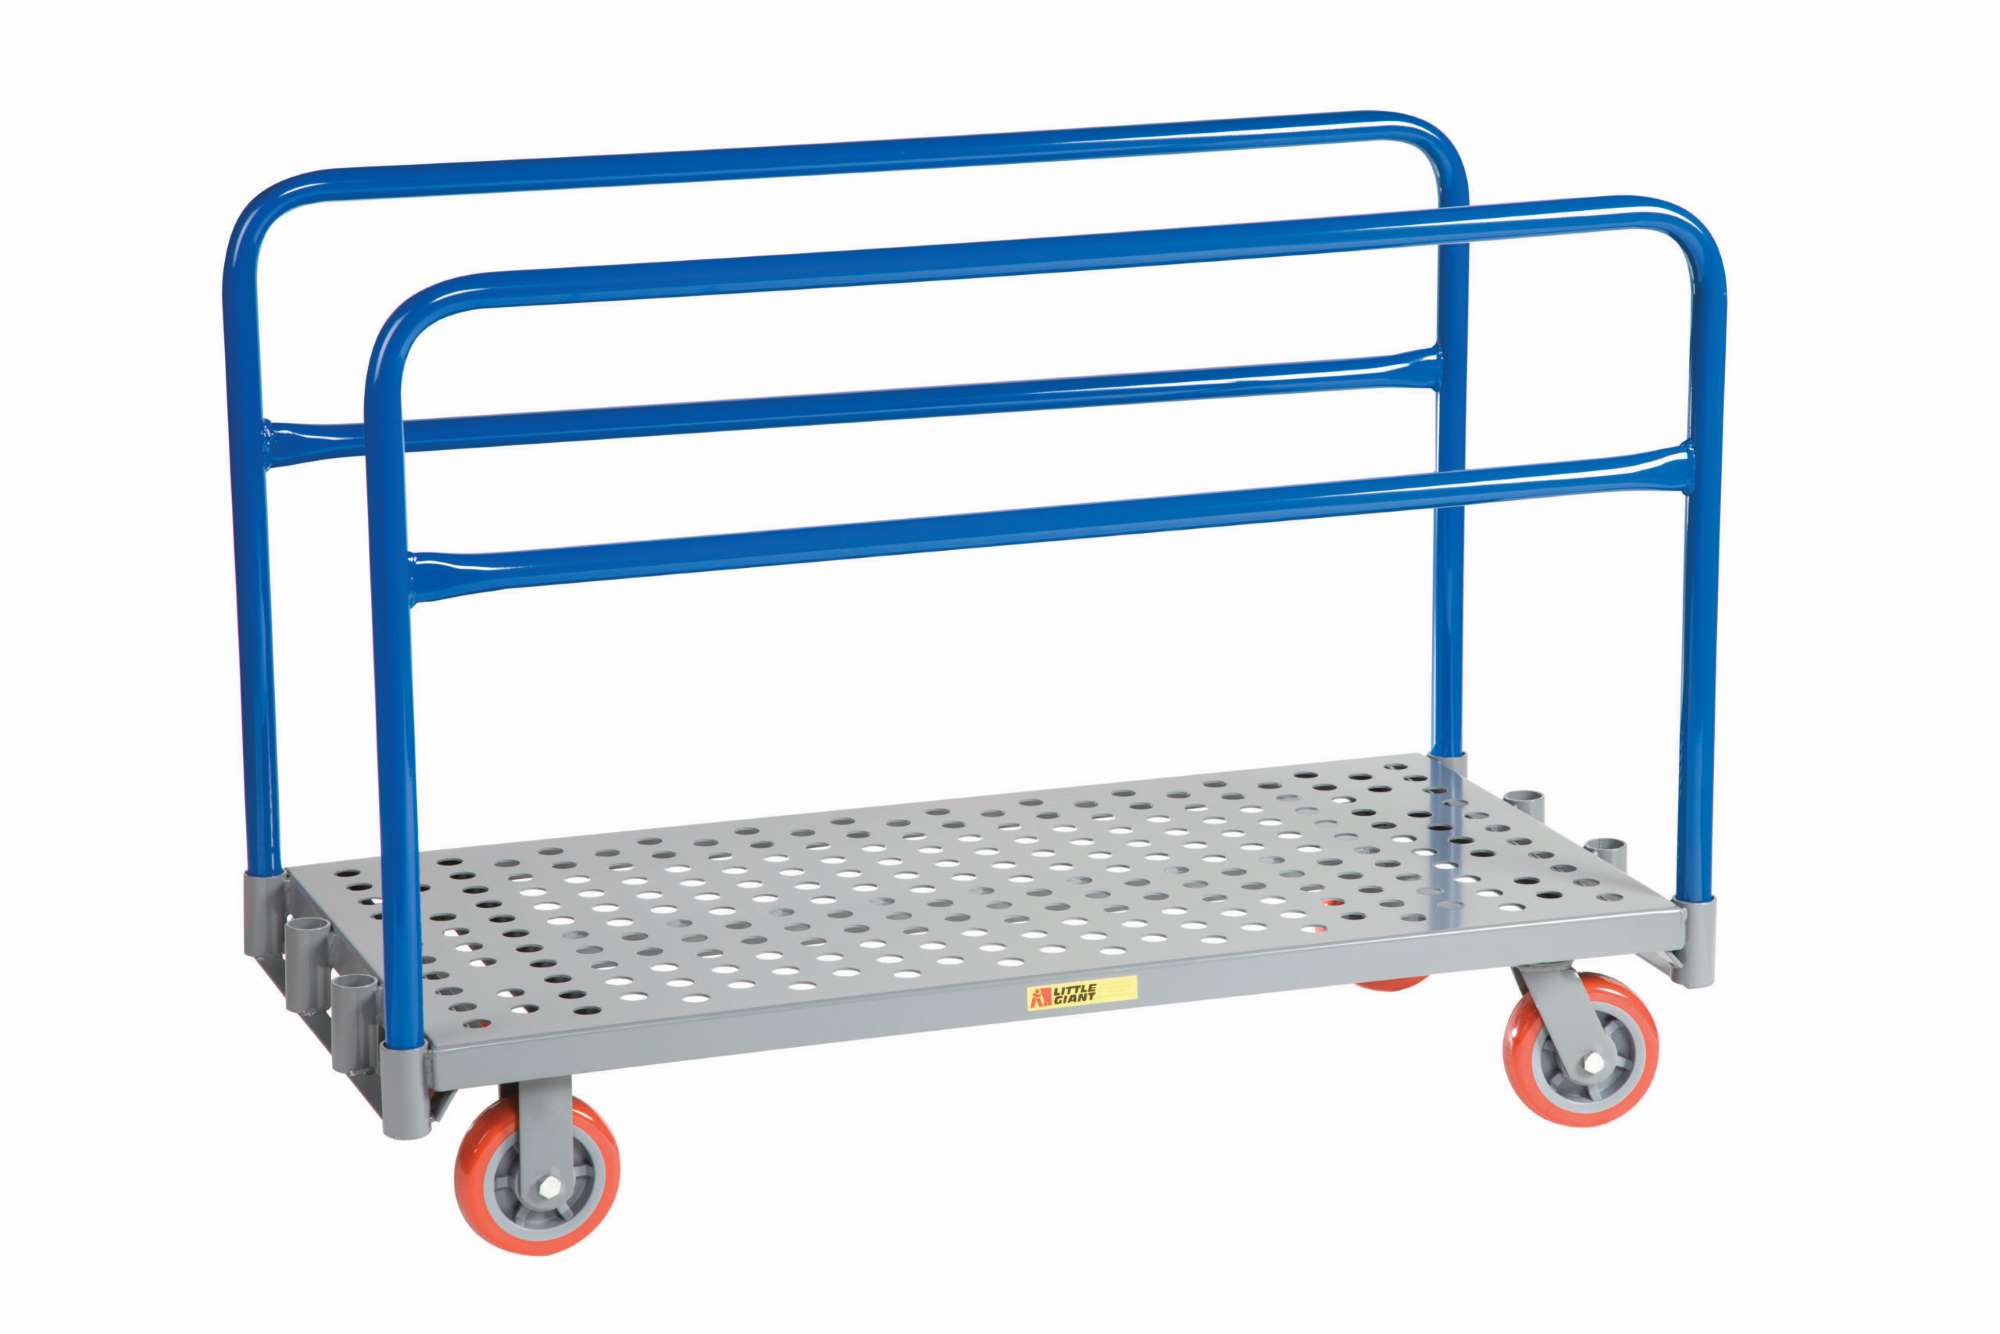 Little Giant, Perforated adjustable sheet & panel truck, 2000 lbs capacity, Perforated 12ga deck, 2 upright dividers, Upright extend 27" above deck, Uprights can be placed in four positions, 2 rigid and 2 swivel casters, 6" wheels